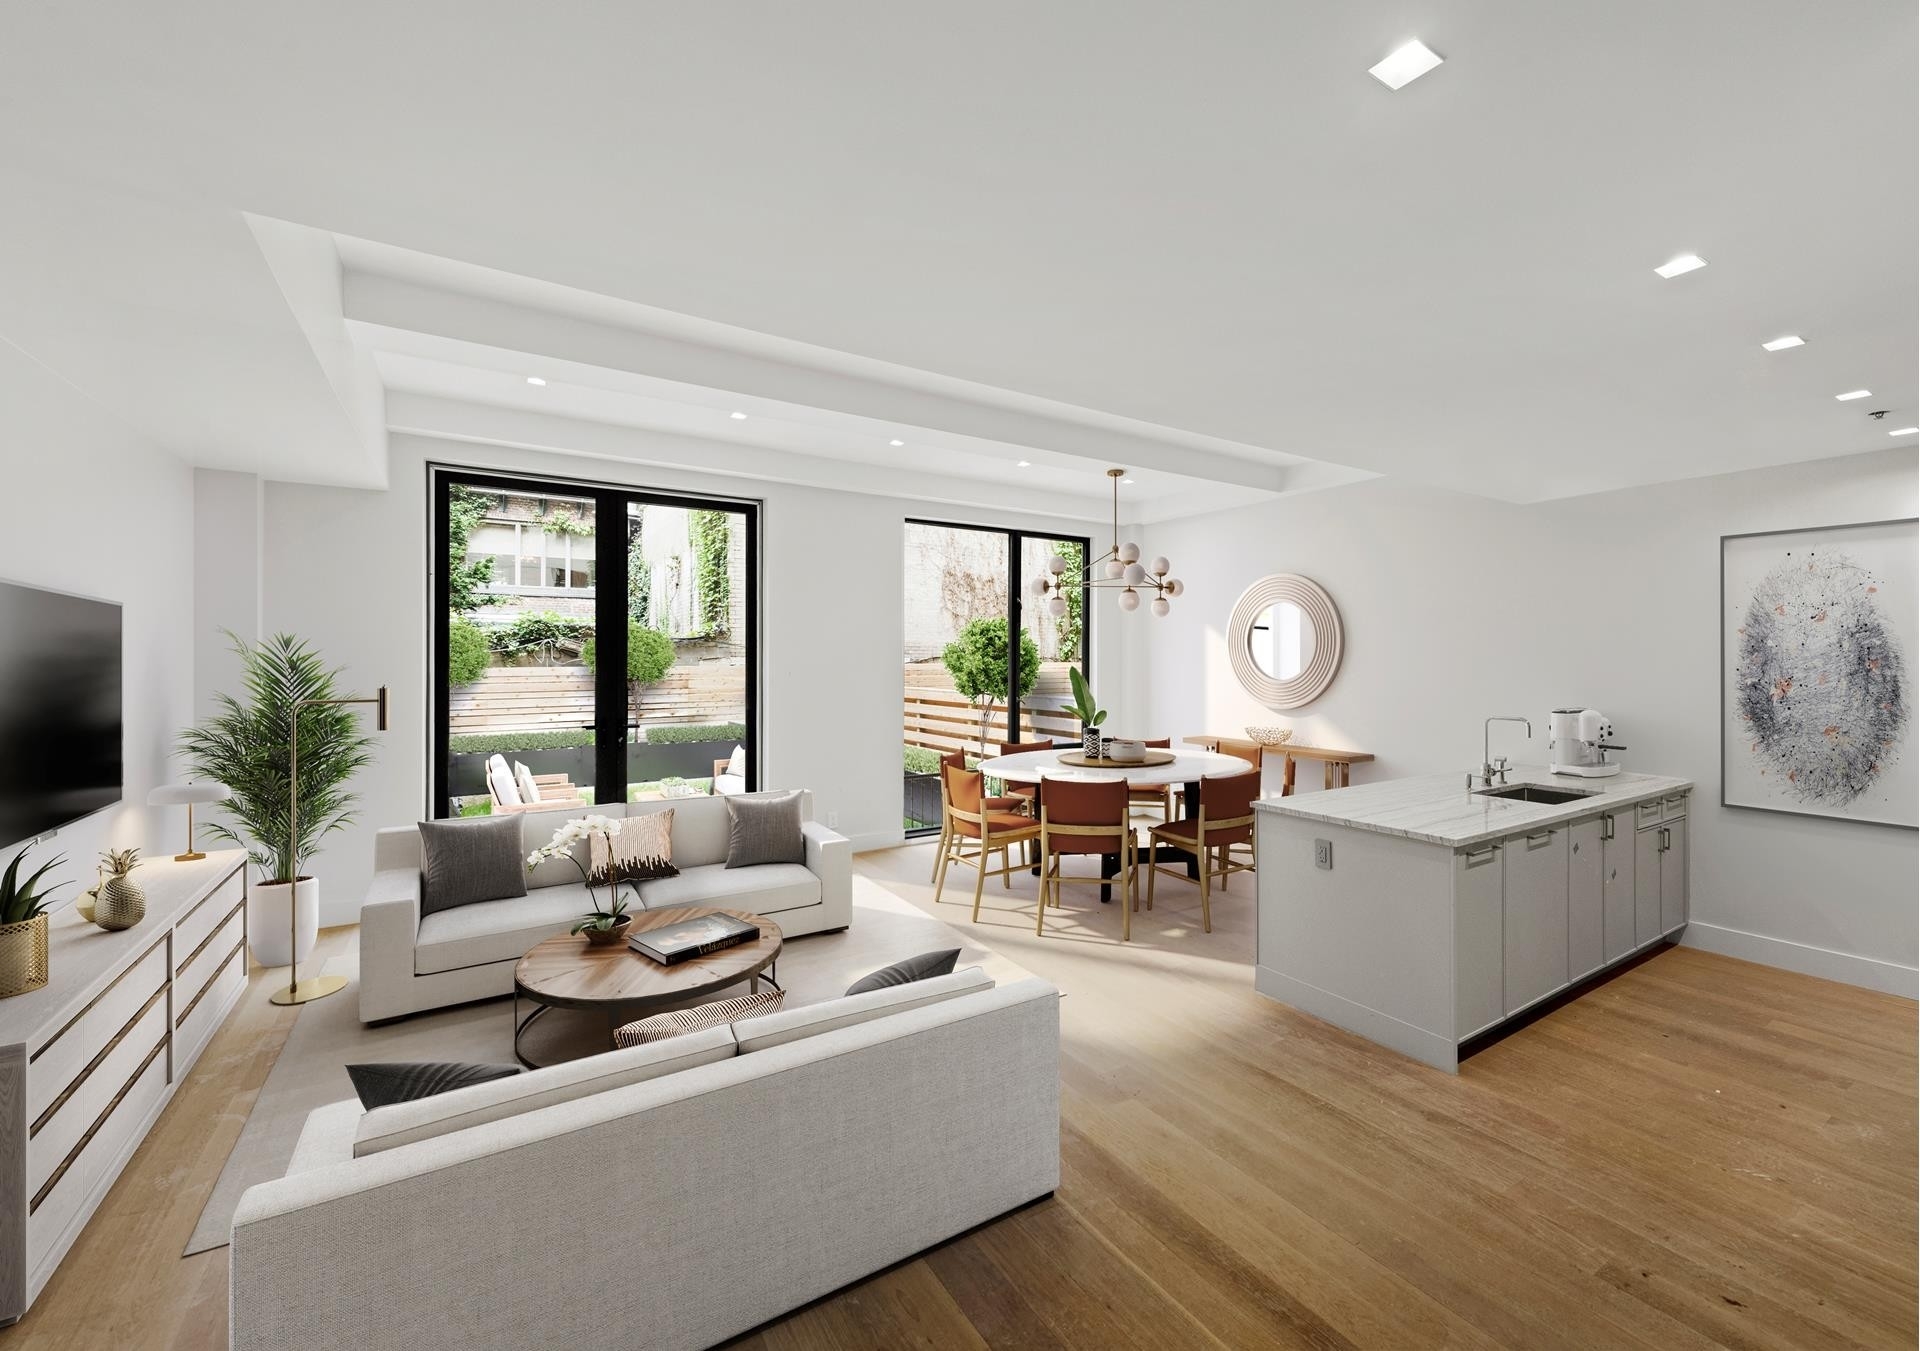 Property at 163 East 62nd St, THB New York